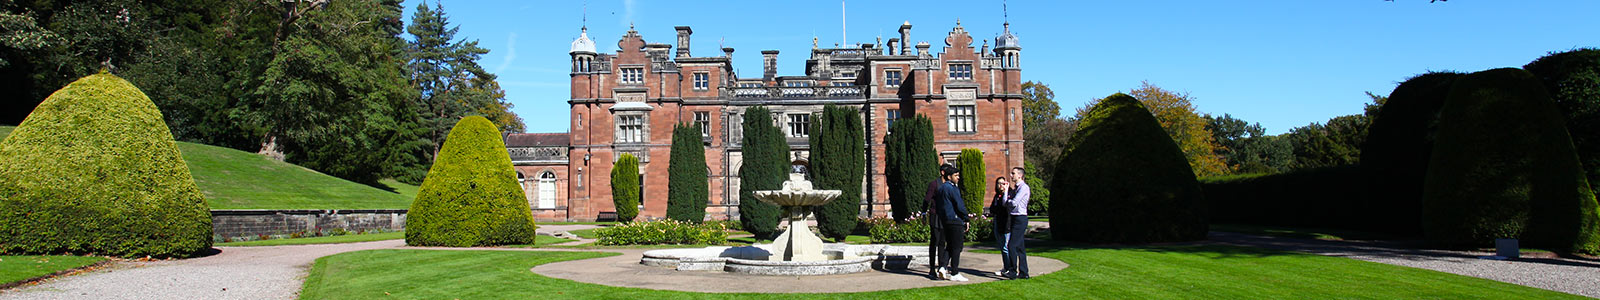 Keele Hall on a sunny day with a fountain in front of the building and four people stood talking